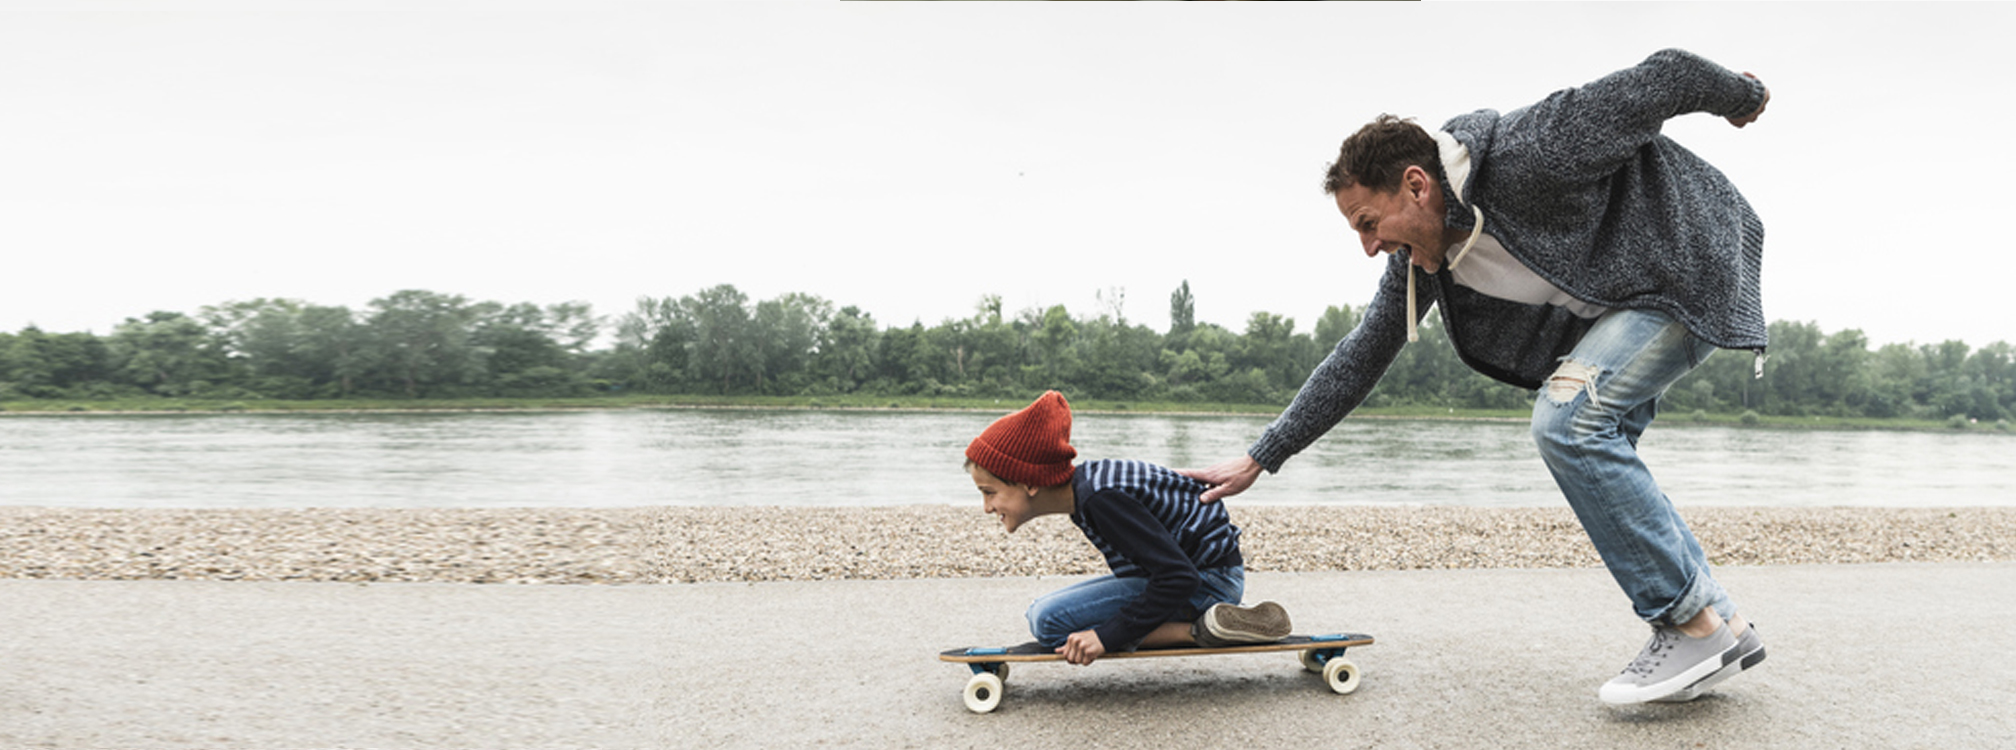 Michelle Liske MD - Father and son skateboarding